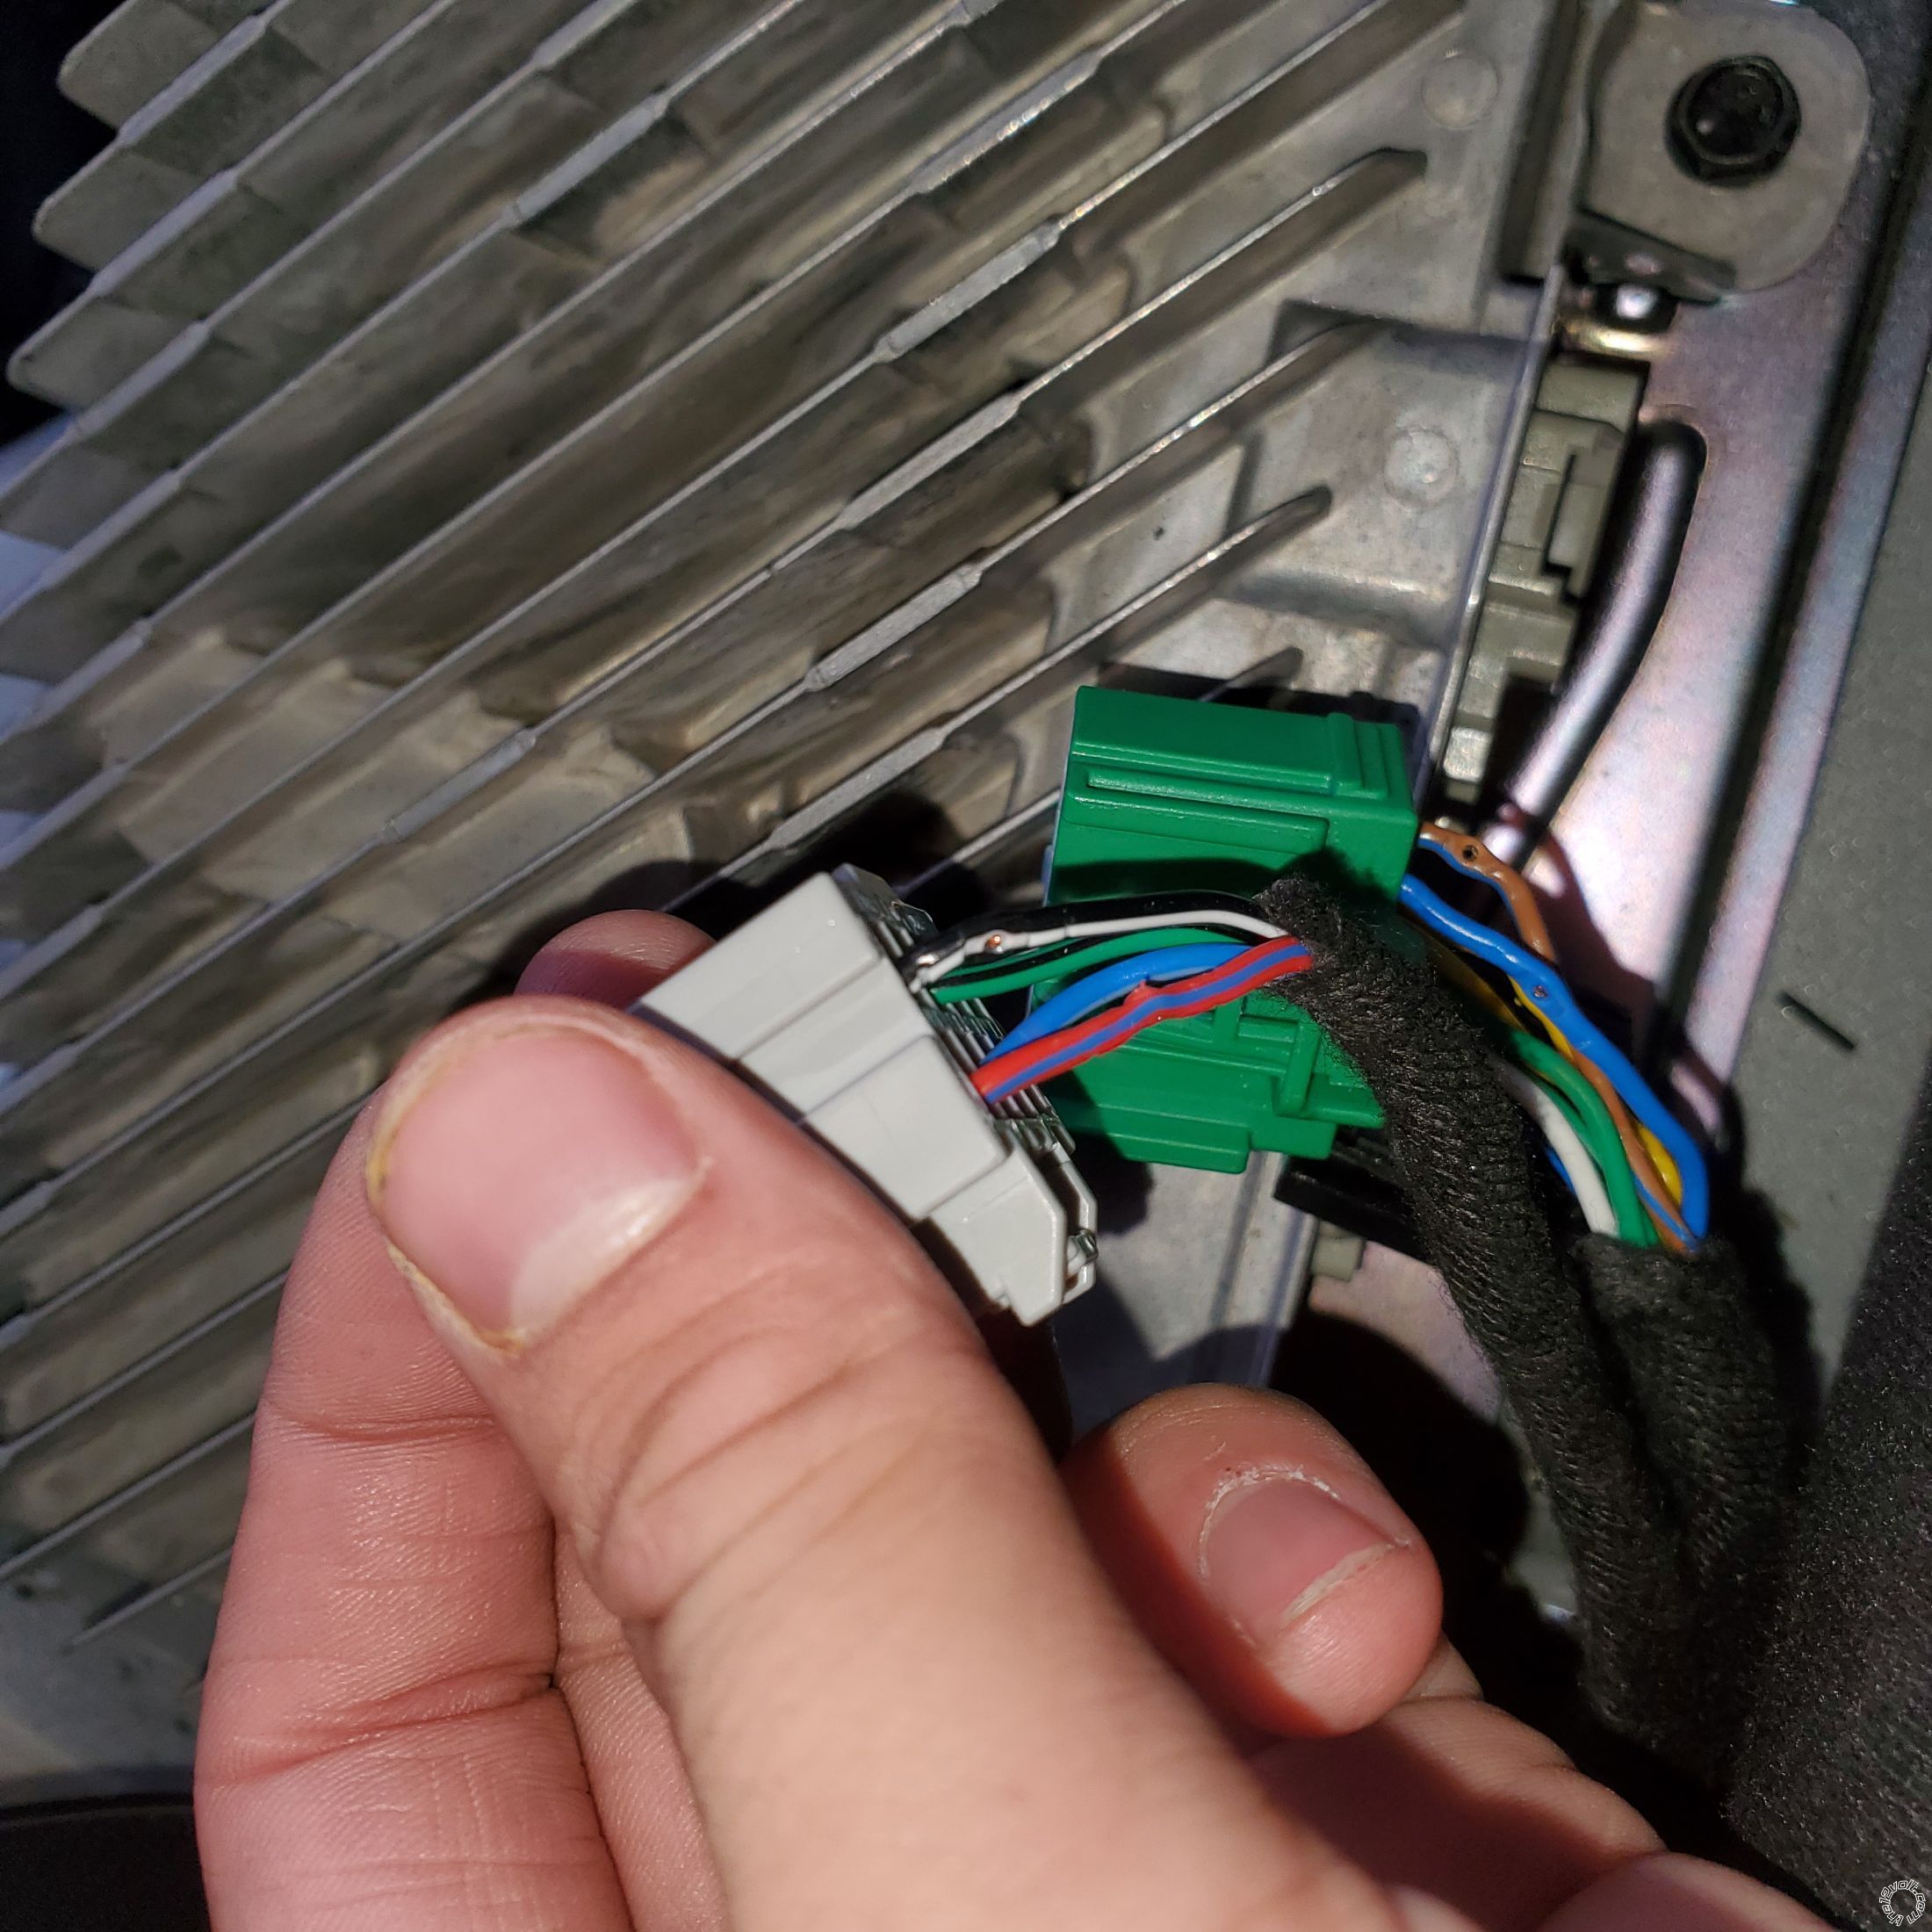 2018 Buick Encore Amplifier Wiring - Last Post -- posted image.